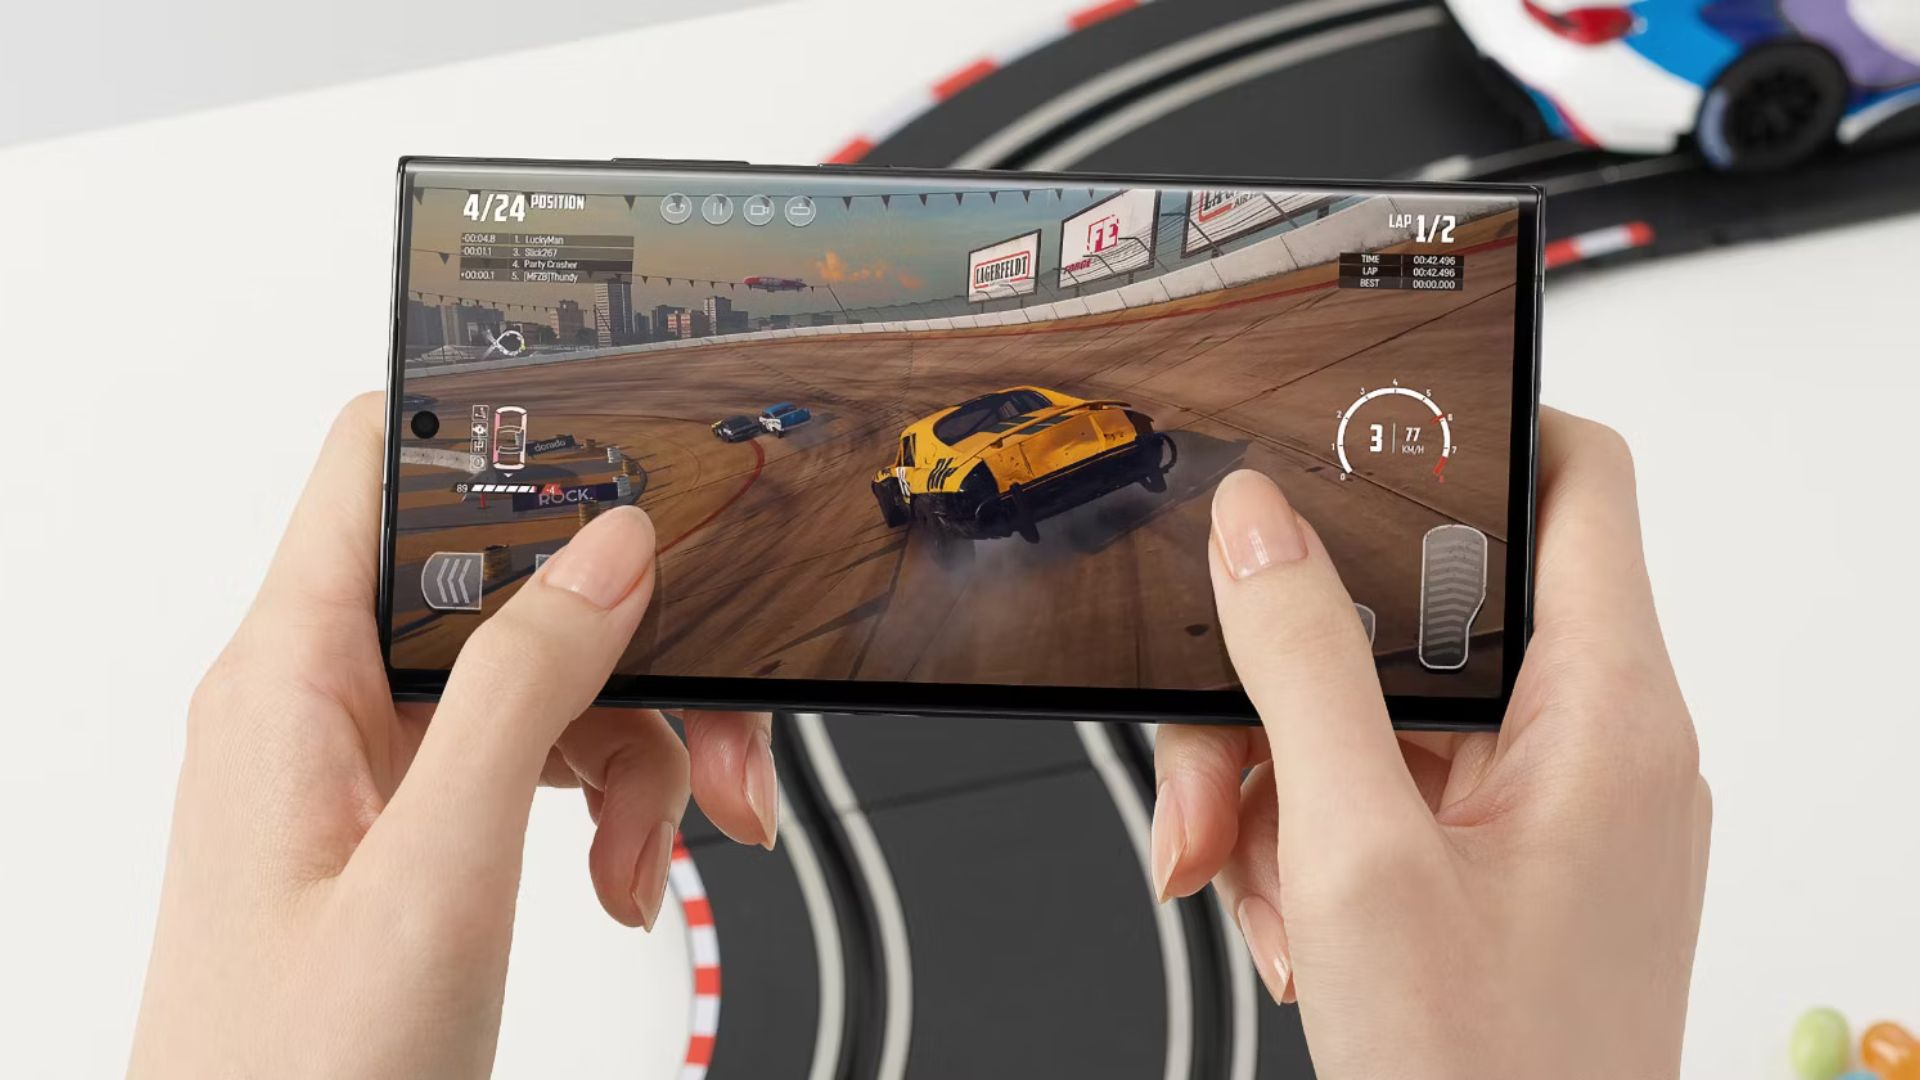 this image shows Gaming Performance on Android Devices